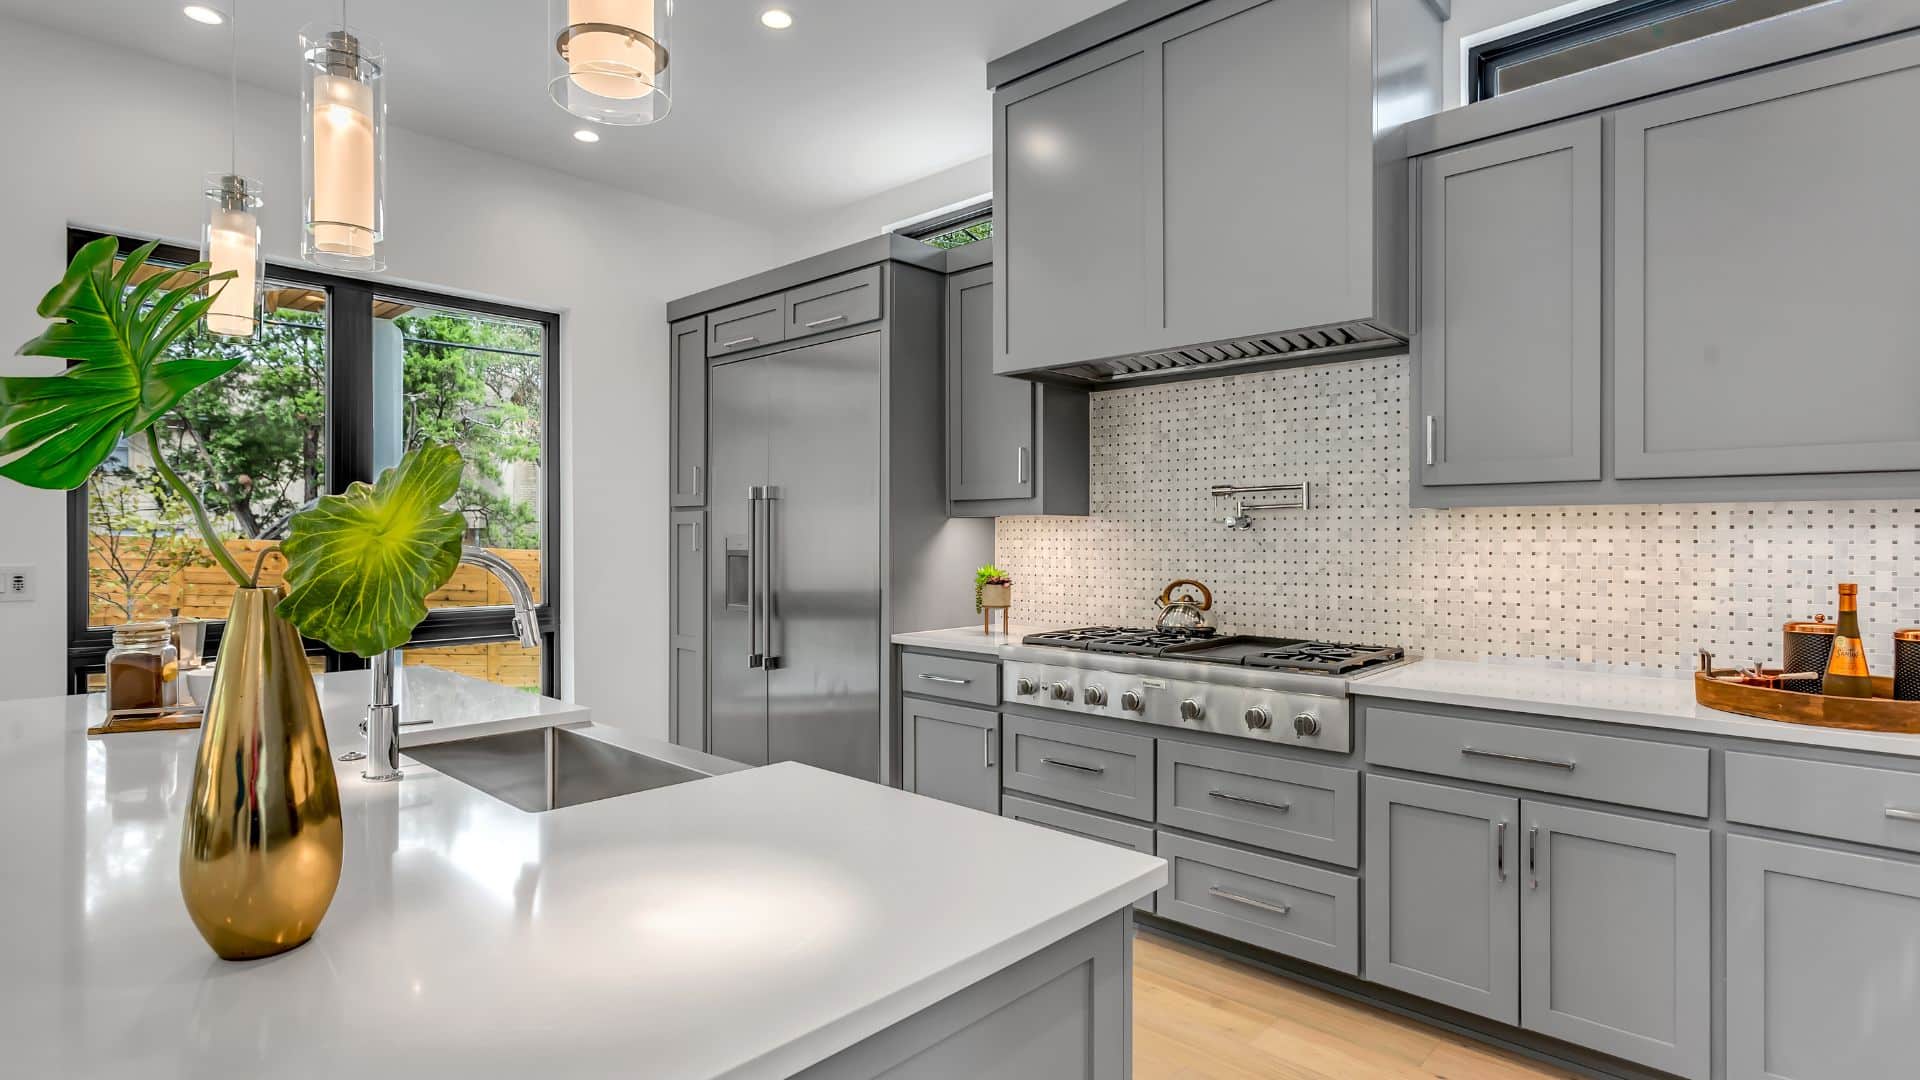 Grey kitchen cabinets with white countertop and backsplash